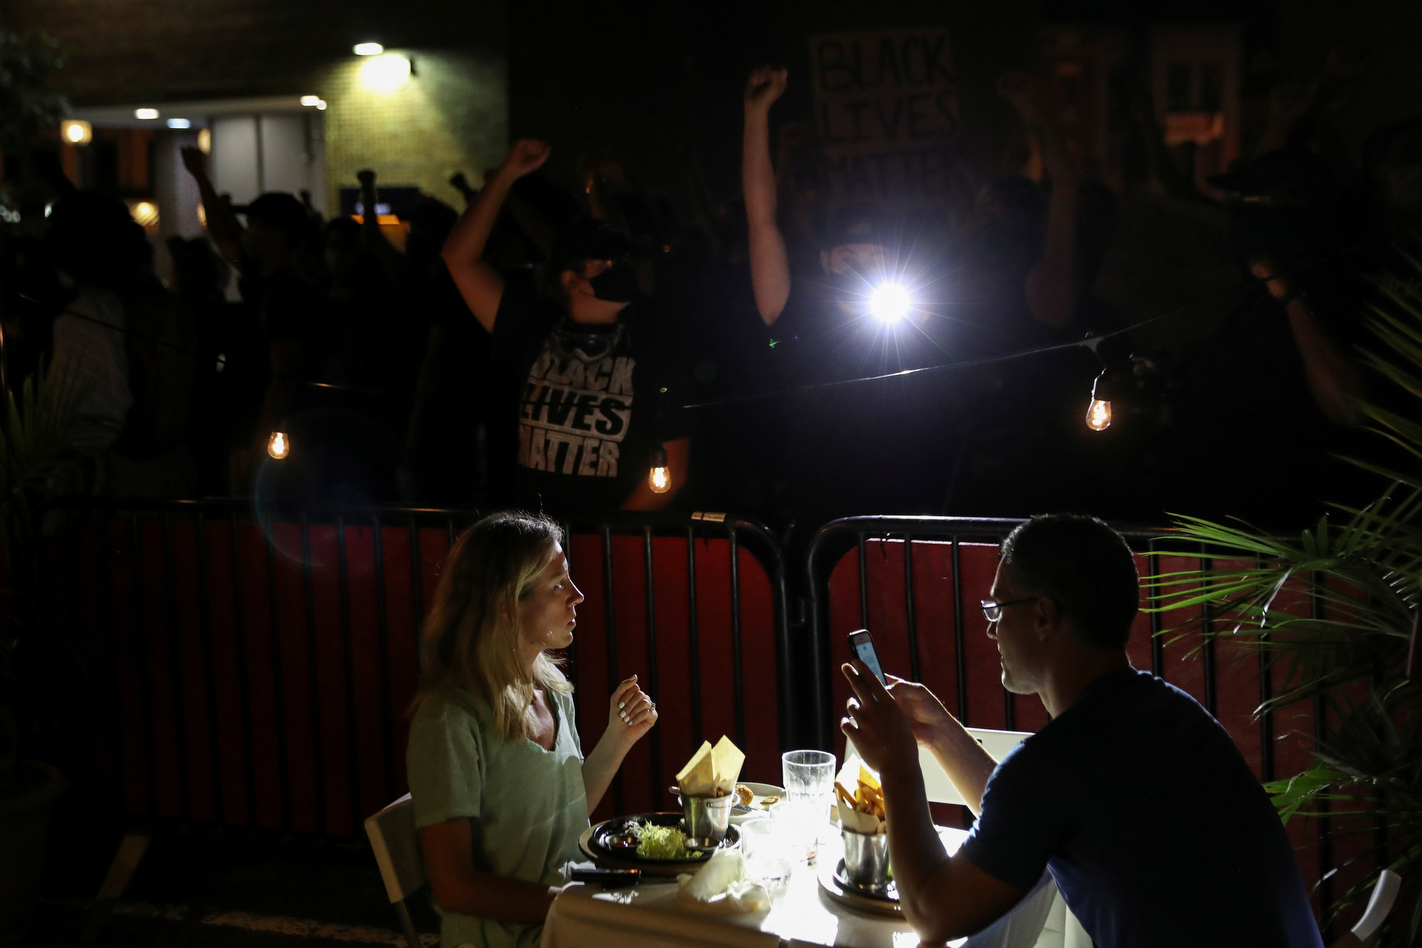 Diners have their meal as protesters tell them about Deon Kay, who died recently after he was shot by local police, in Washington, U.S., September 5, 2020. REUTERS/Leah Millis